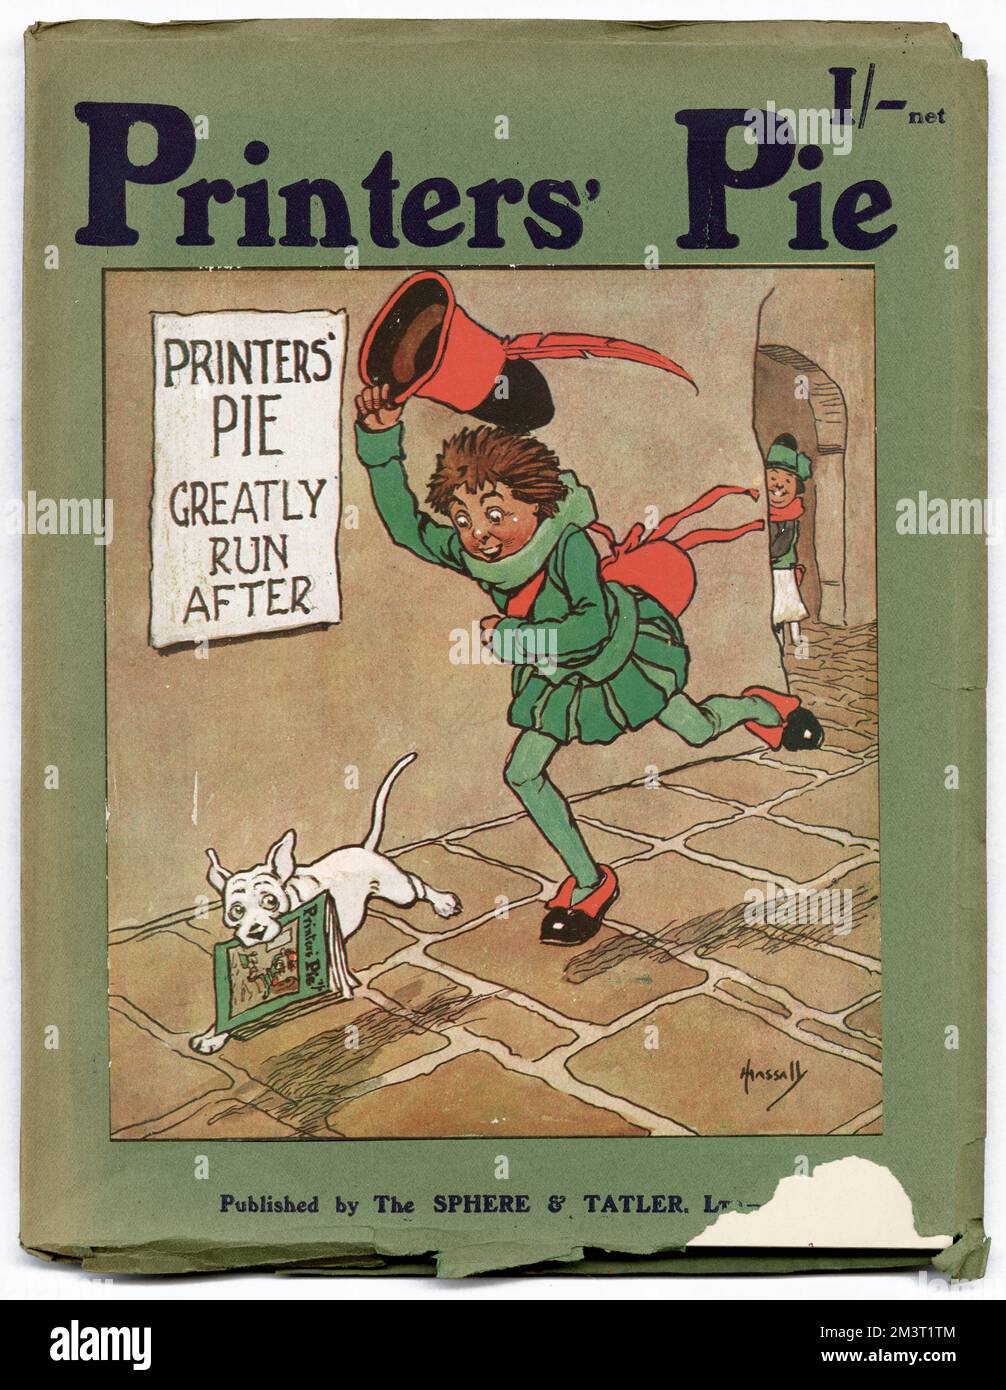 Front cover of Printers' Pie magazine for 1911, illustrated by John Hassall and featuring one of his typical medieval characters chasing after a dog. Printers' Pie was published by The Sphere and Tatler in aid of printers' charities and edited by W. Hugh Spottiswoode. A sister publication, Winter's Pie, was published each Christmas. Both magazines carried contributions from the leading artists and humorous writers of the day including John Hassall (who designed the covers), William Heath Robinson, Lawson Wood and Walter Emanuel. Stock Photo